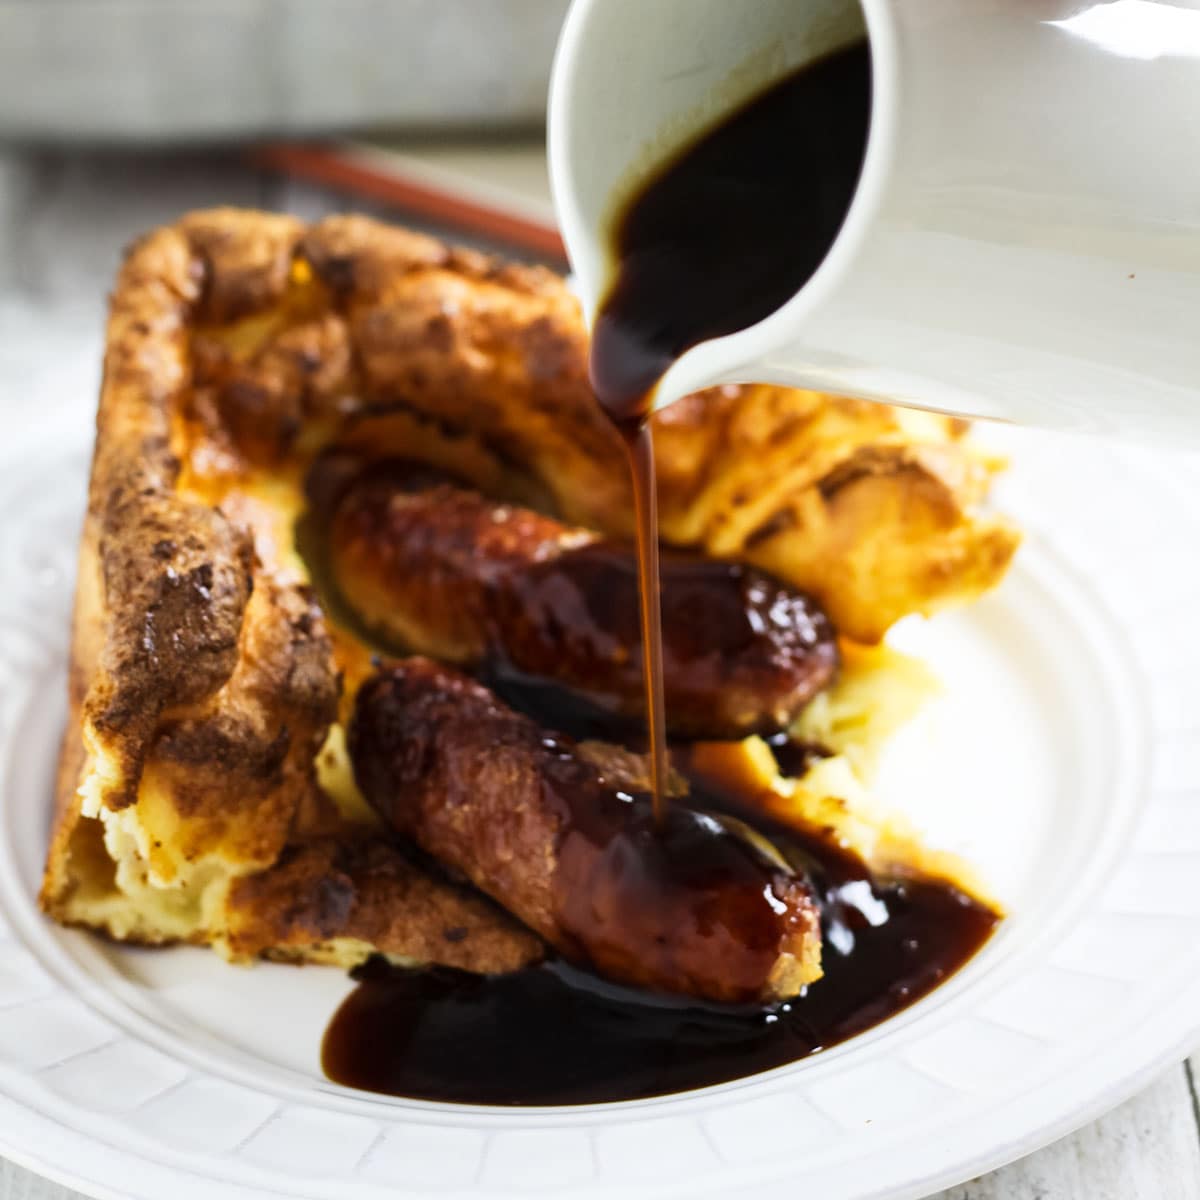 gravy poured onto Toad in the hole.